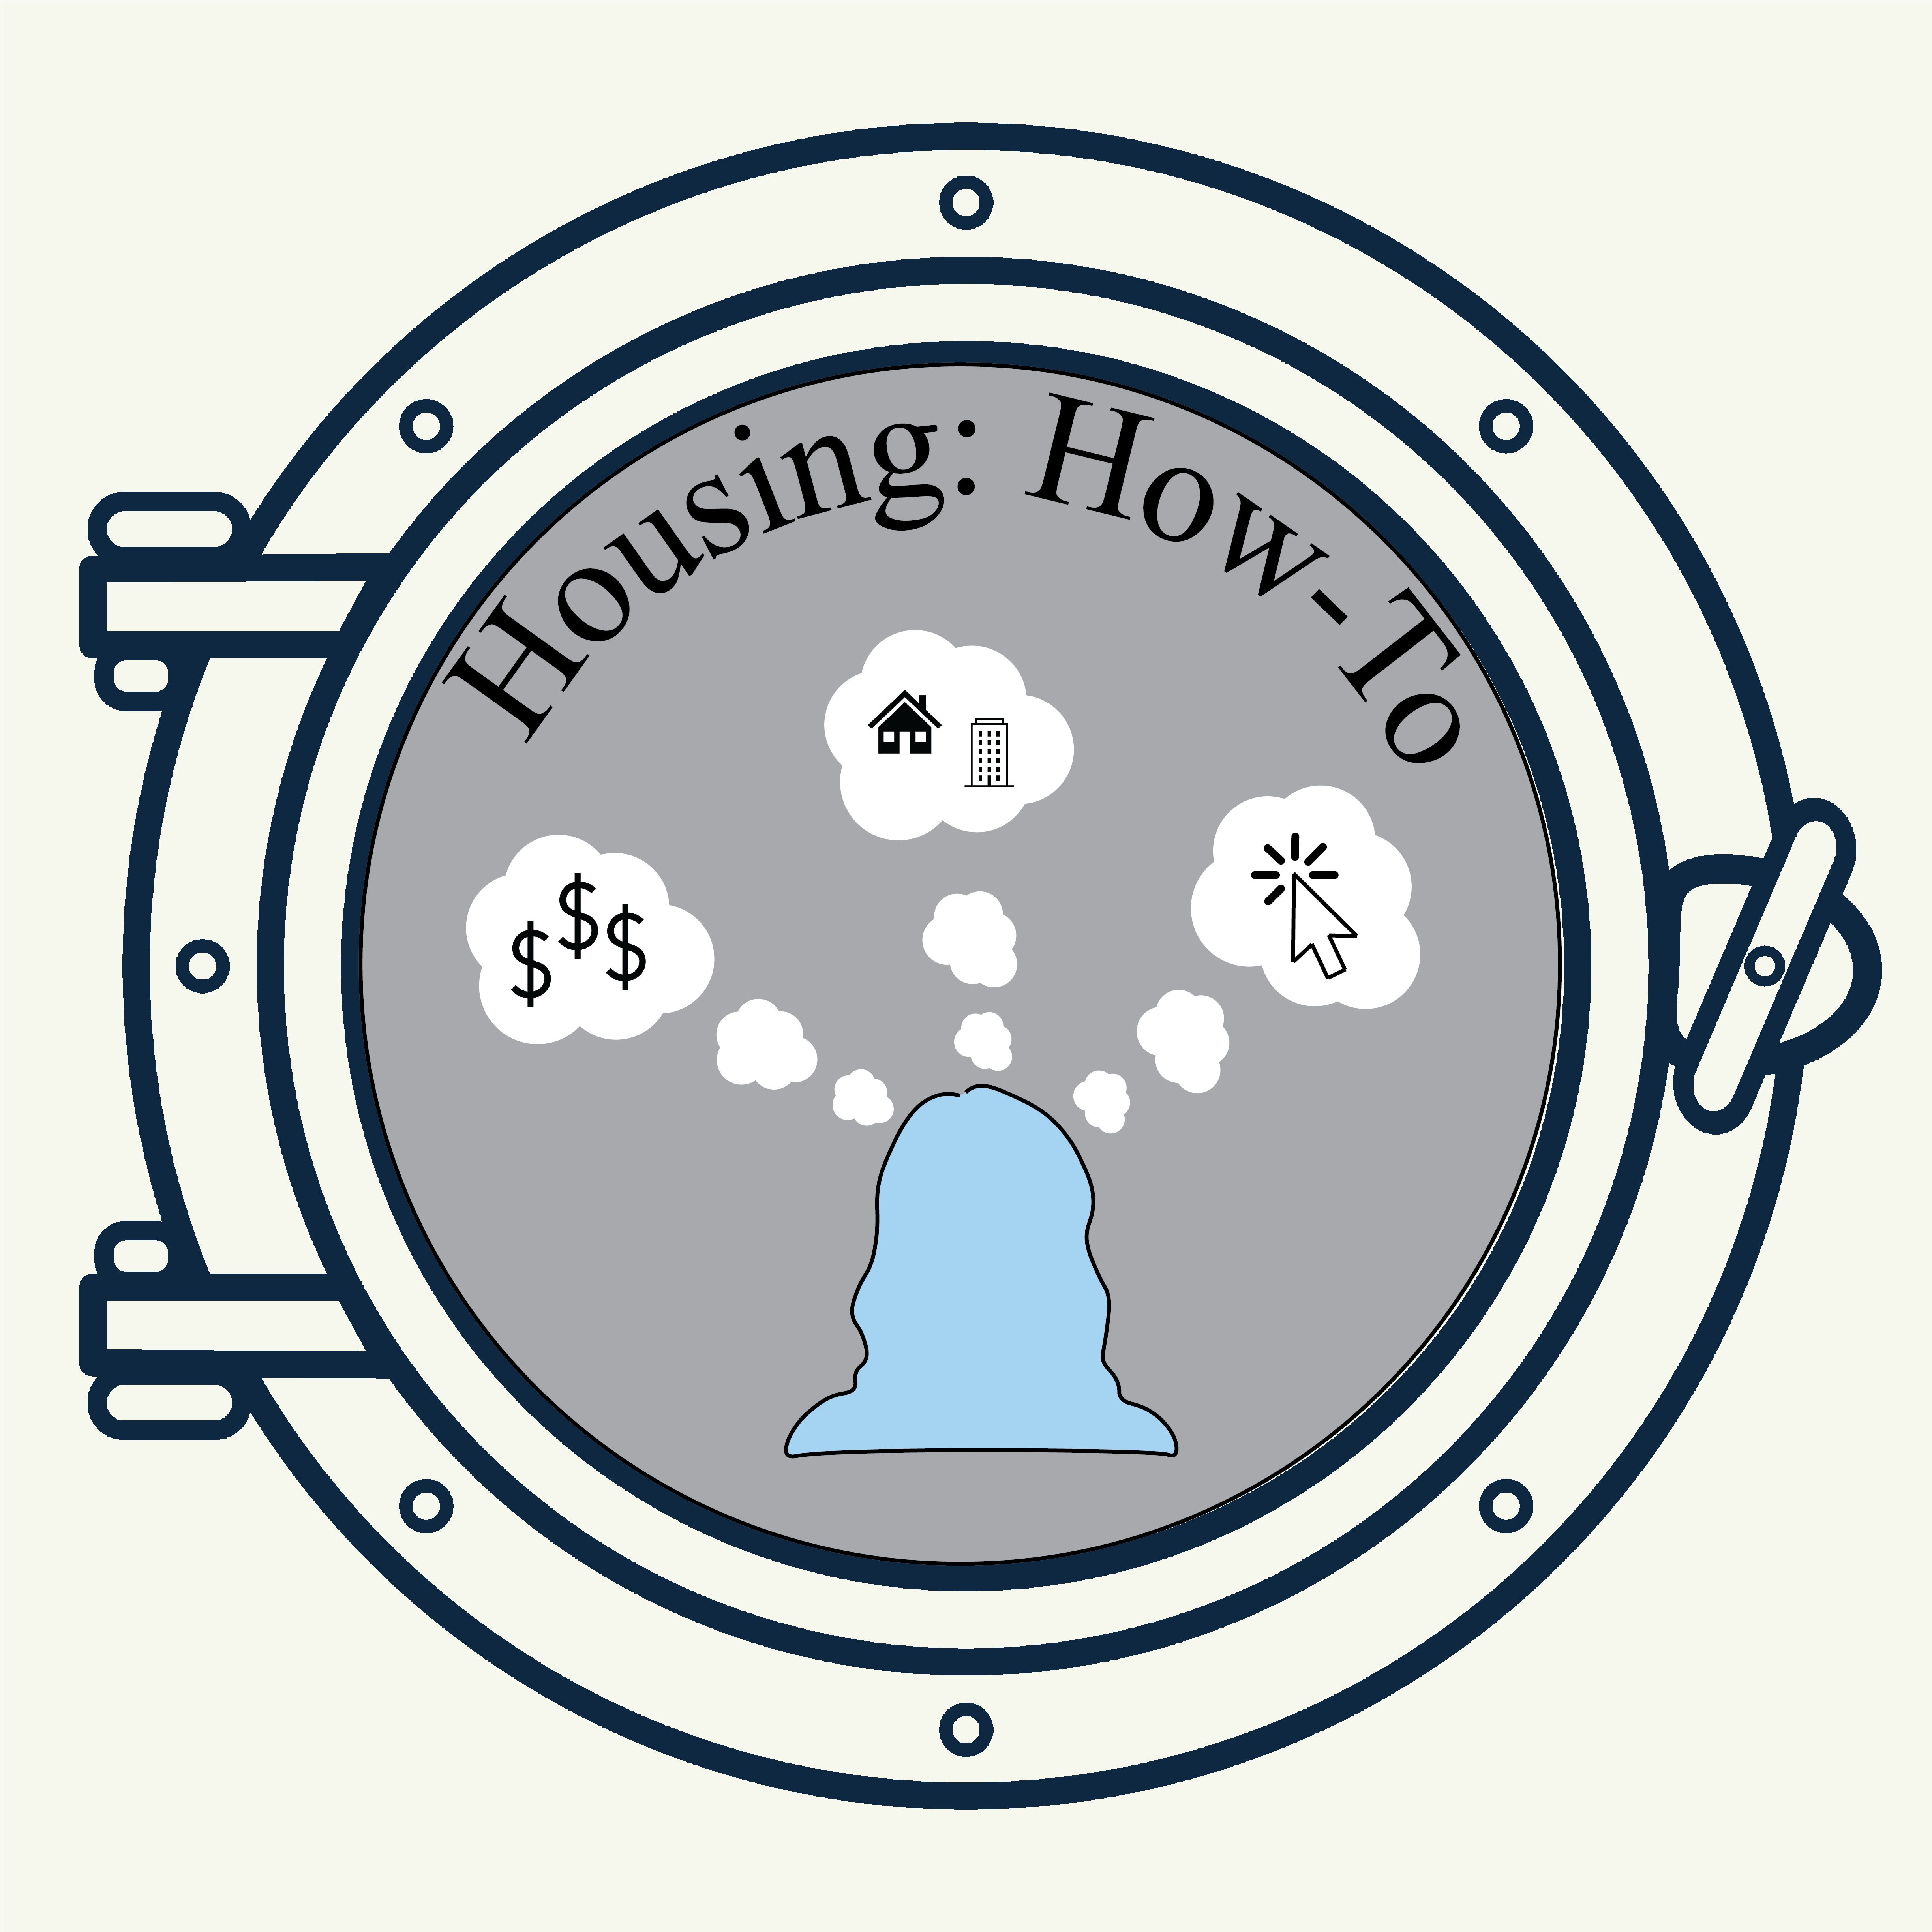 Housing_How_To_Porthole_Graphic